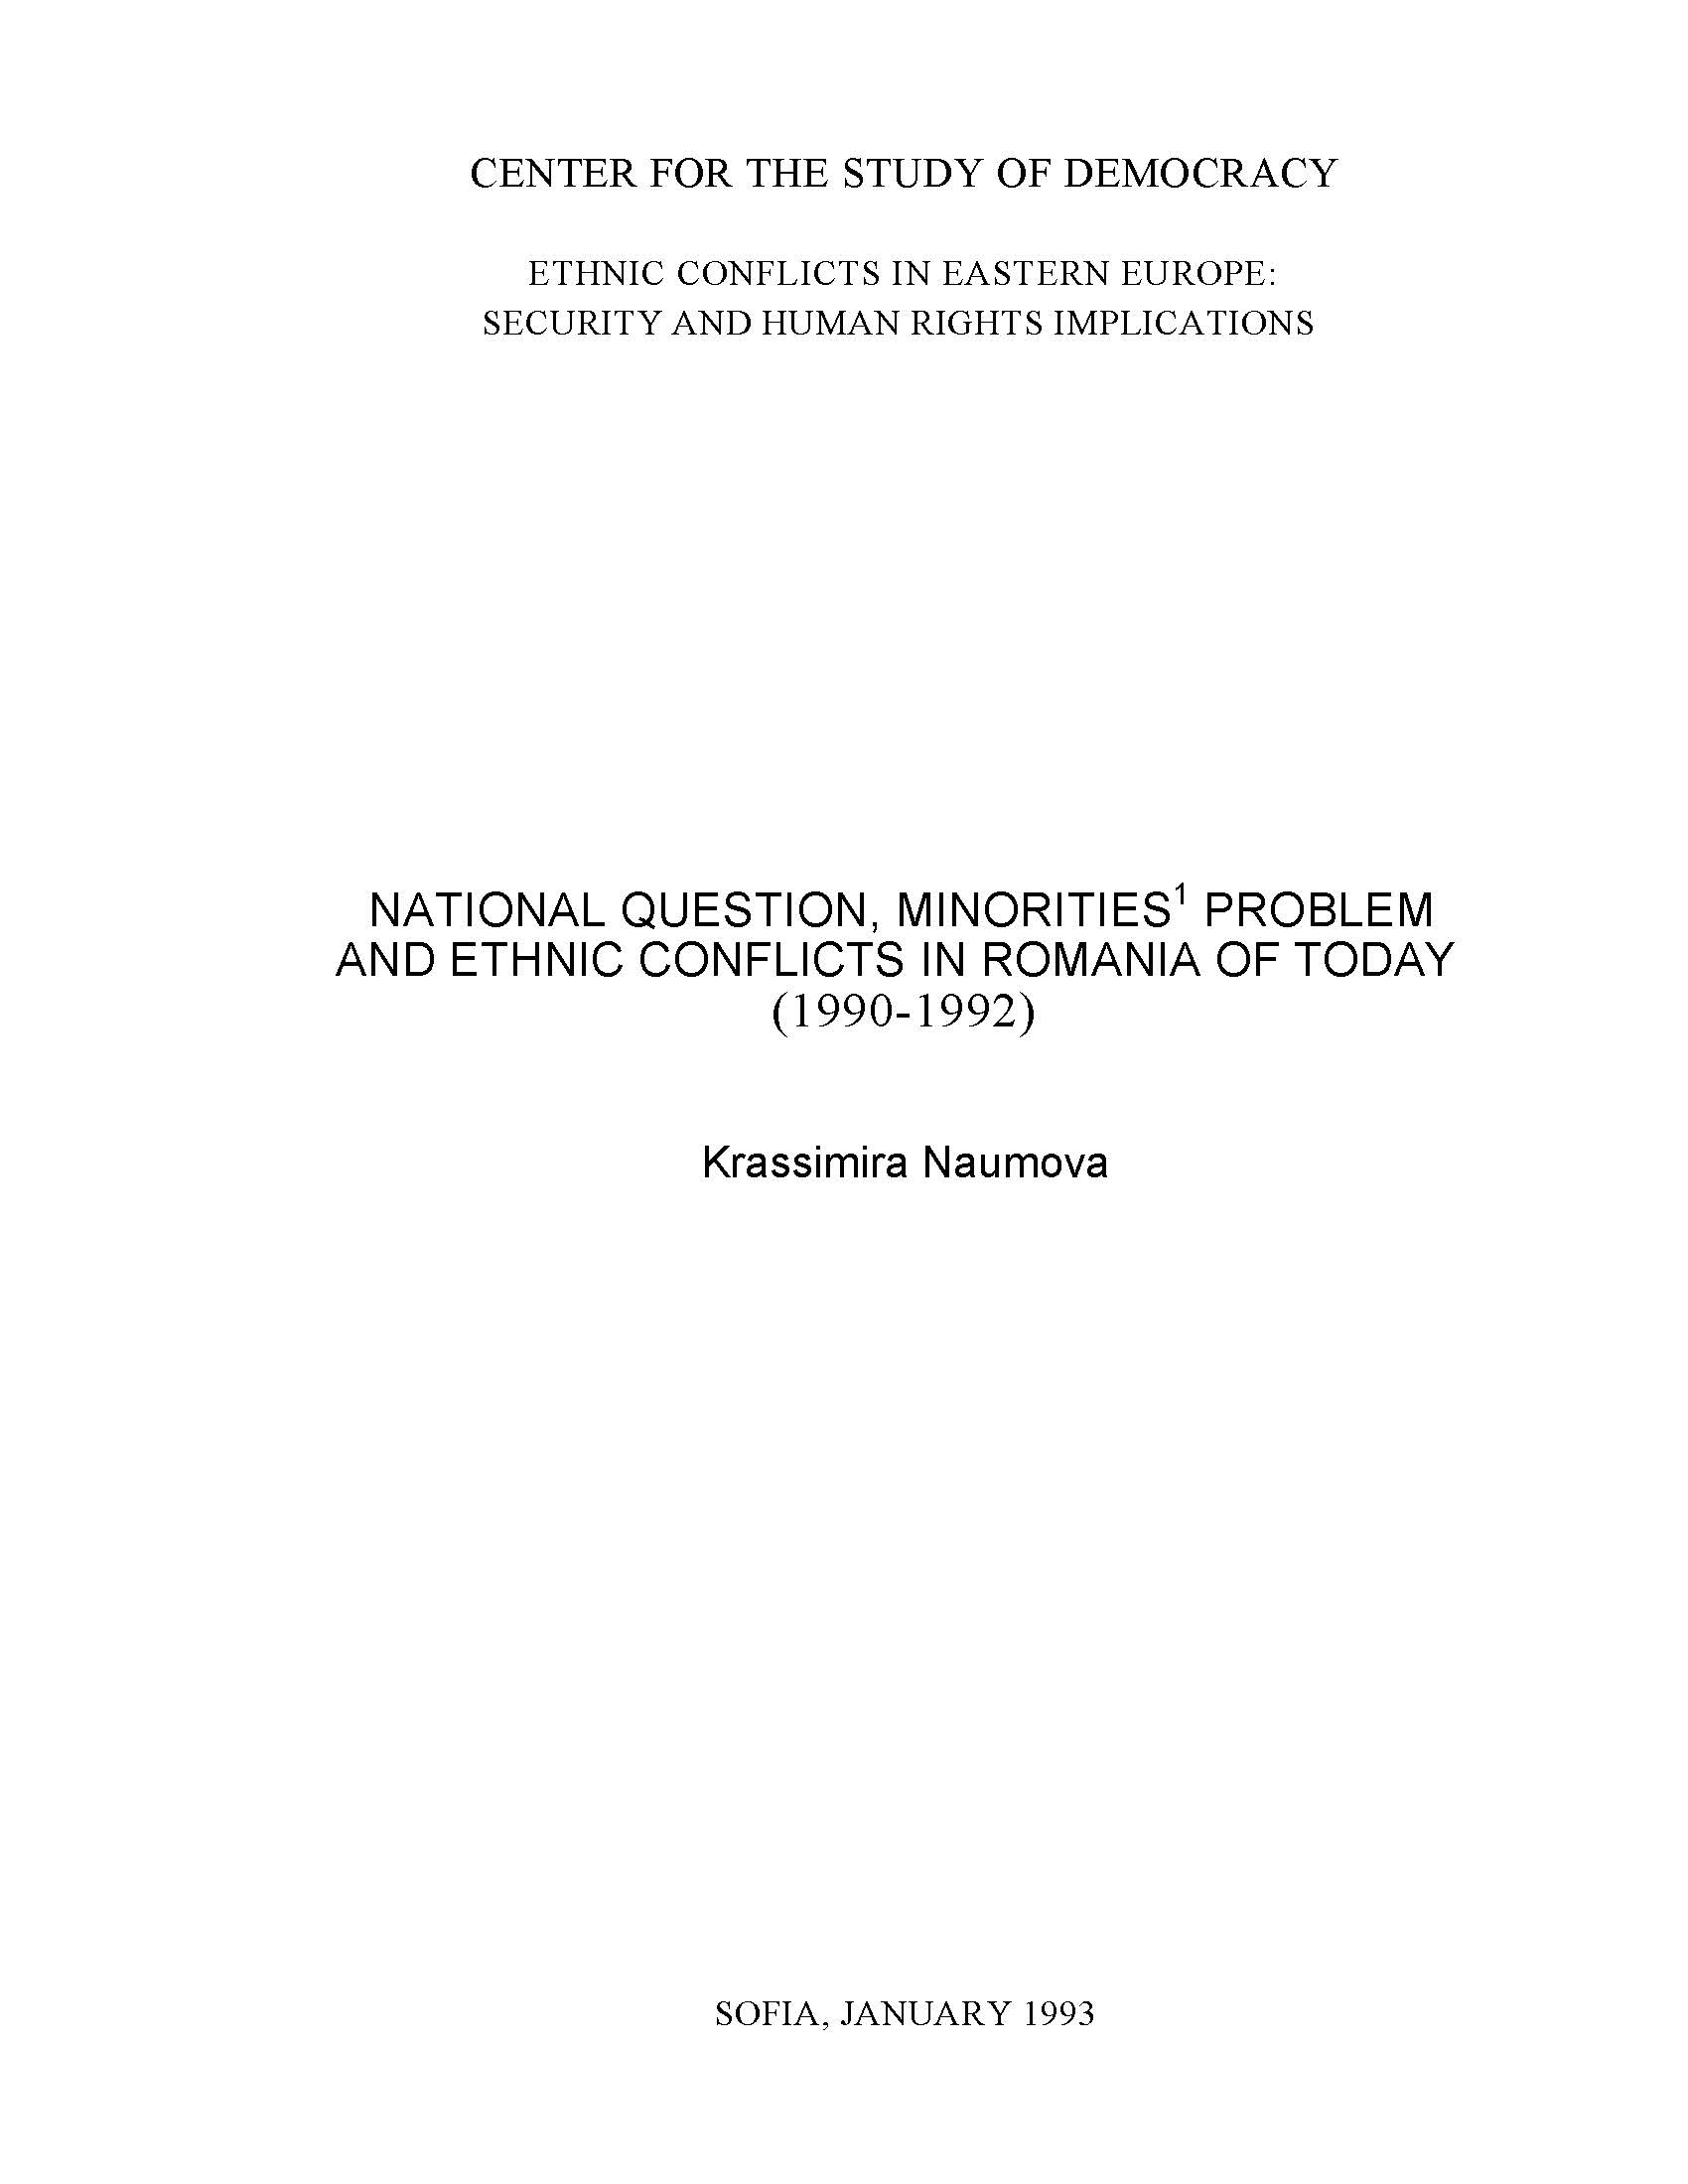 National Question, Minorities’ Problem and Ethnic Conflicts in Romania of Today (1990-1992) Cover Image